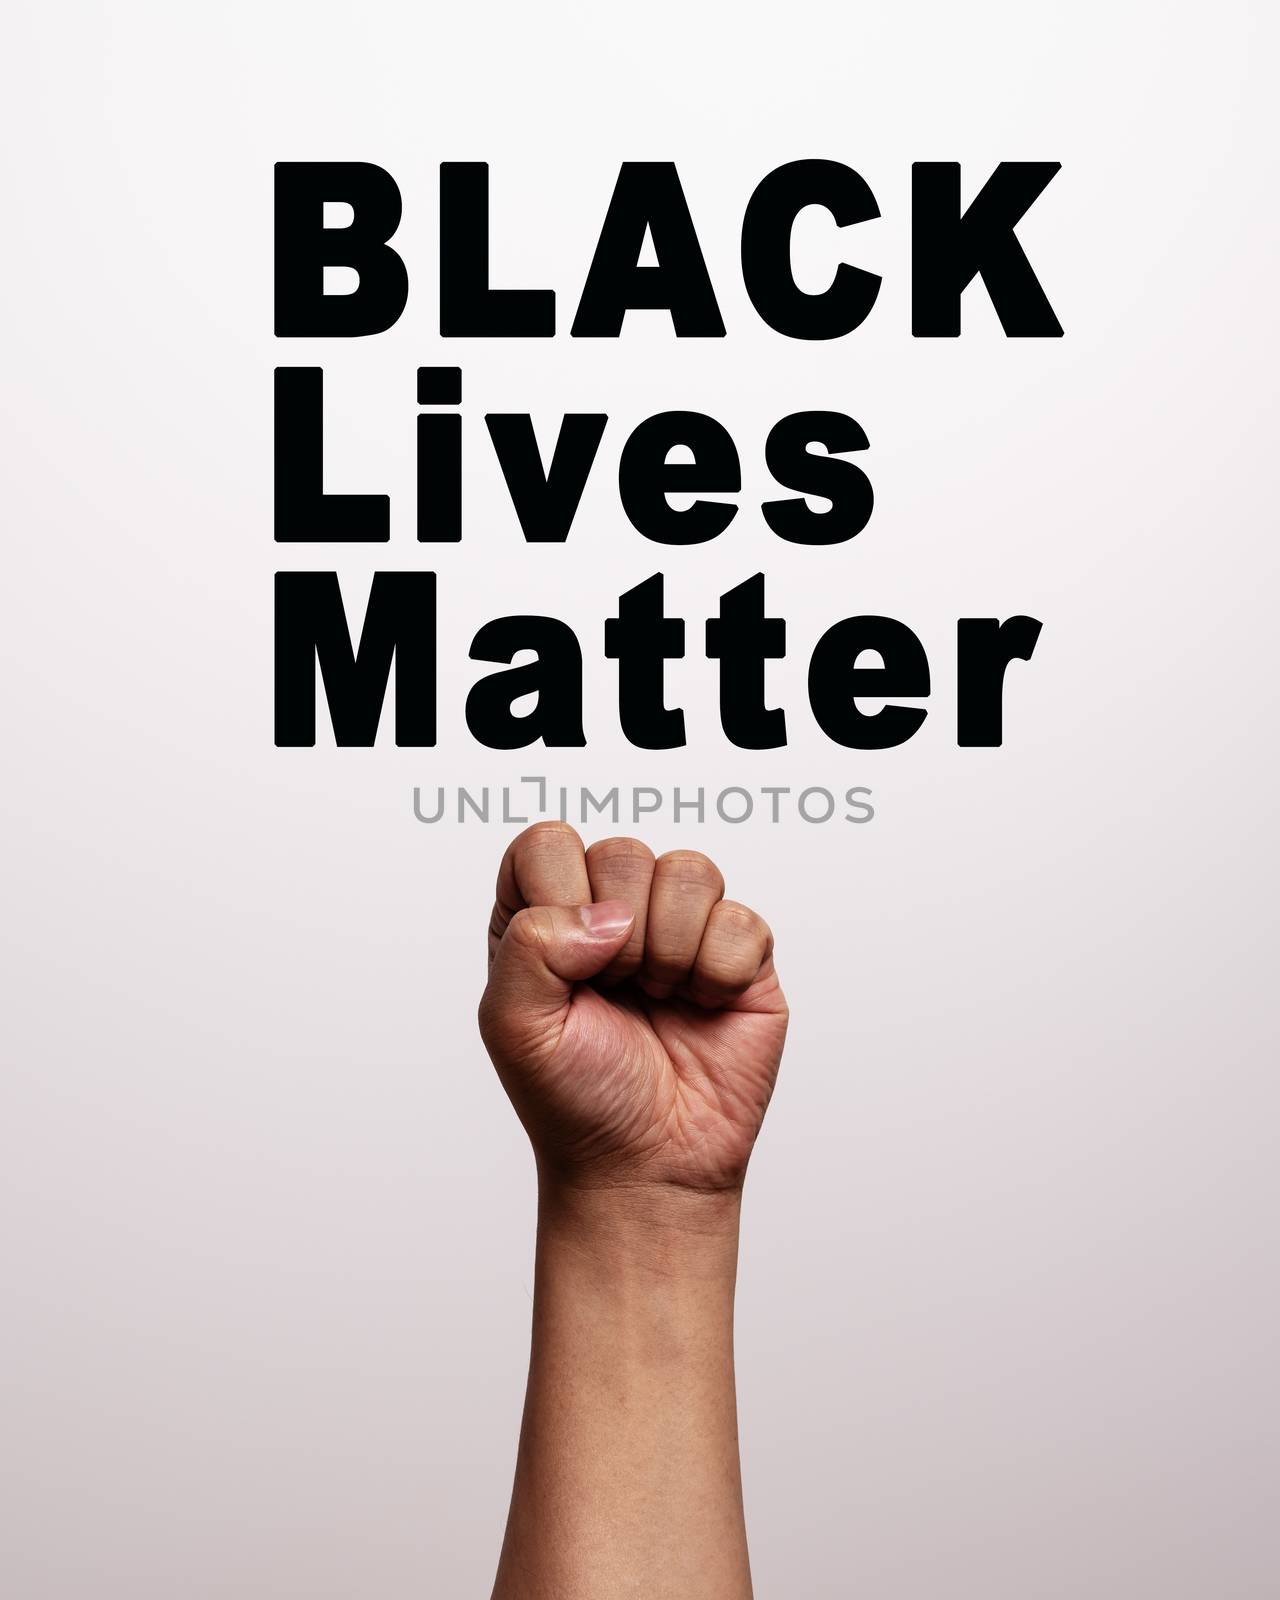 Black Lives Matter with Strong Fist as sign of Black Power by psodaz